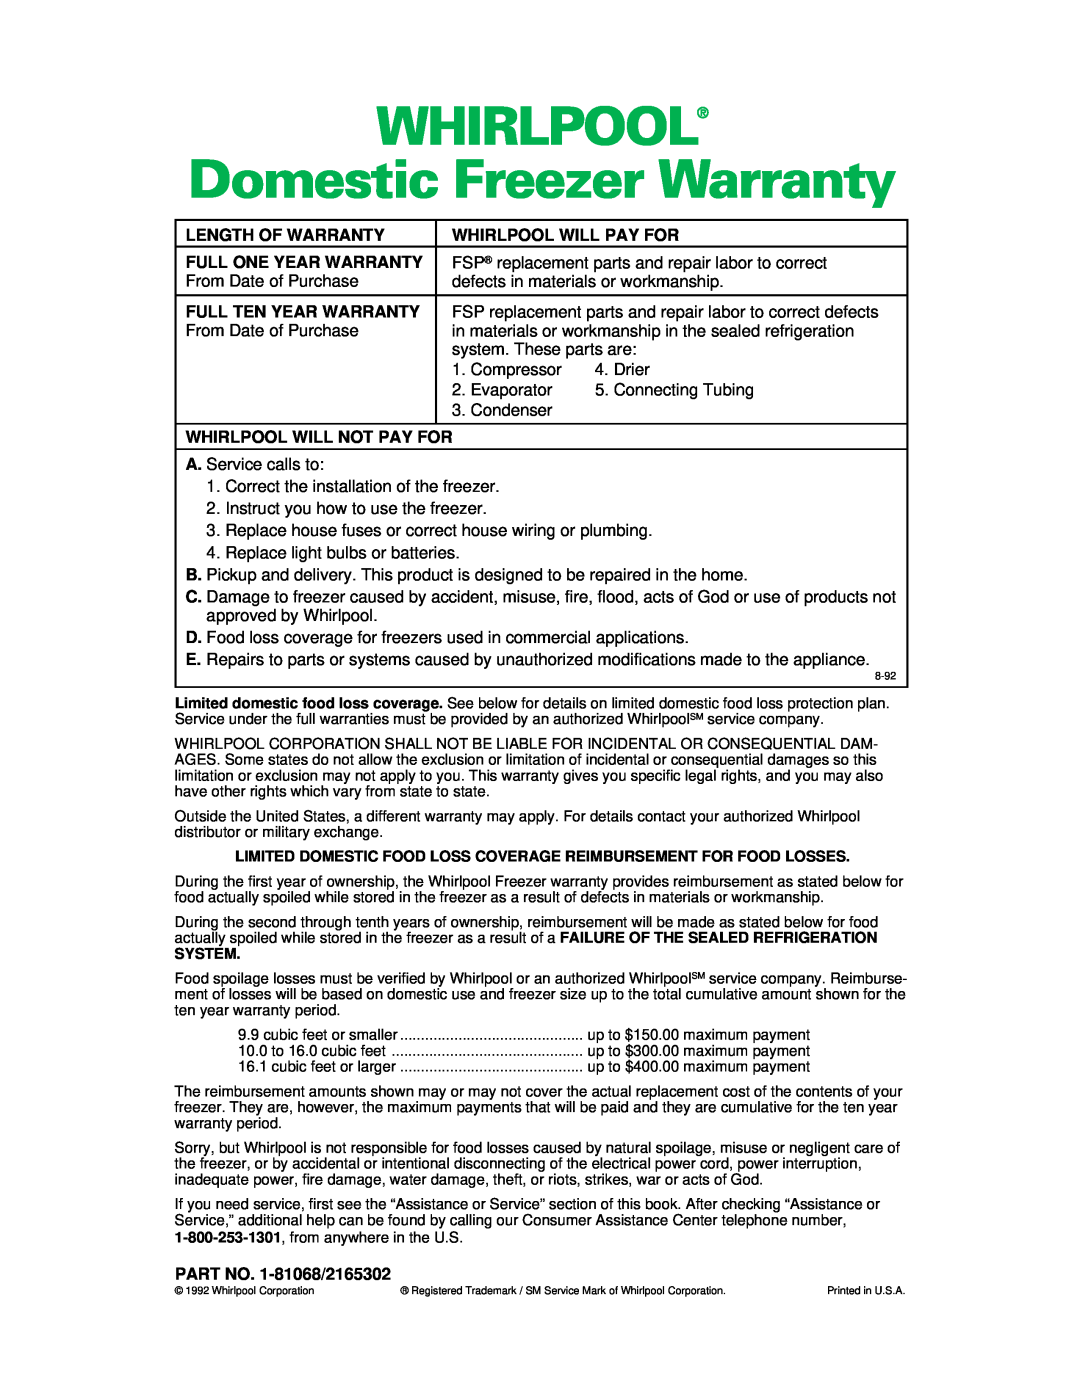 Whirlpool UPRIGHT FREEZER WHIRLPOOL Domestic Freezer Warranty, Length Of Warranty, Whirlpool Will Pay For 